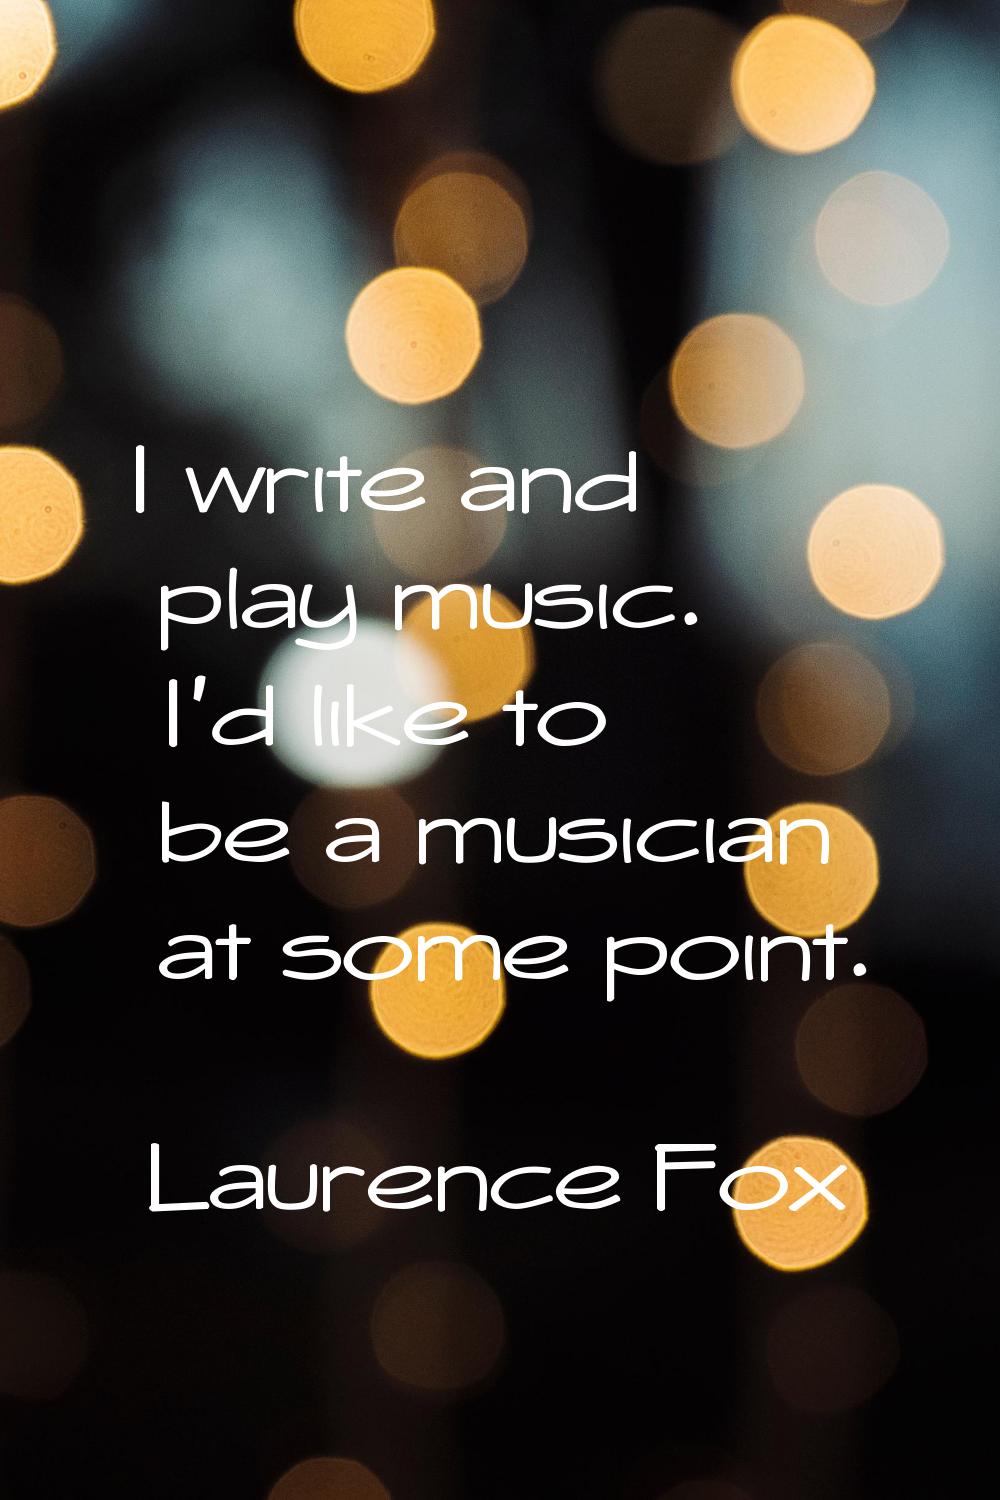 I write and play music. I'd like to be a musician at some point.